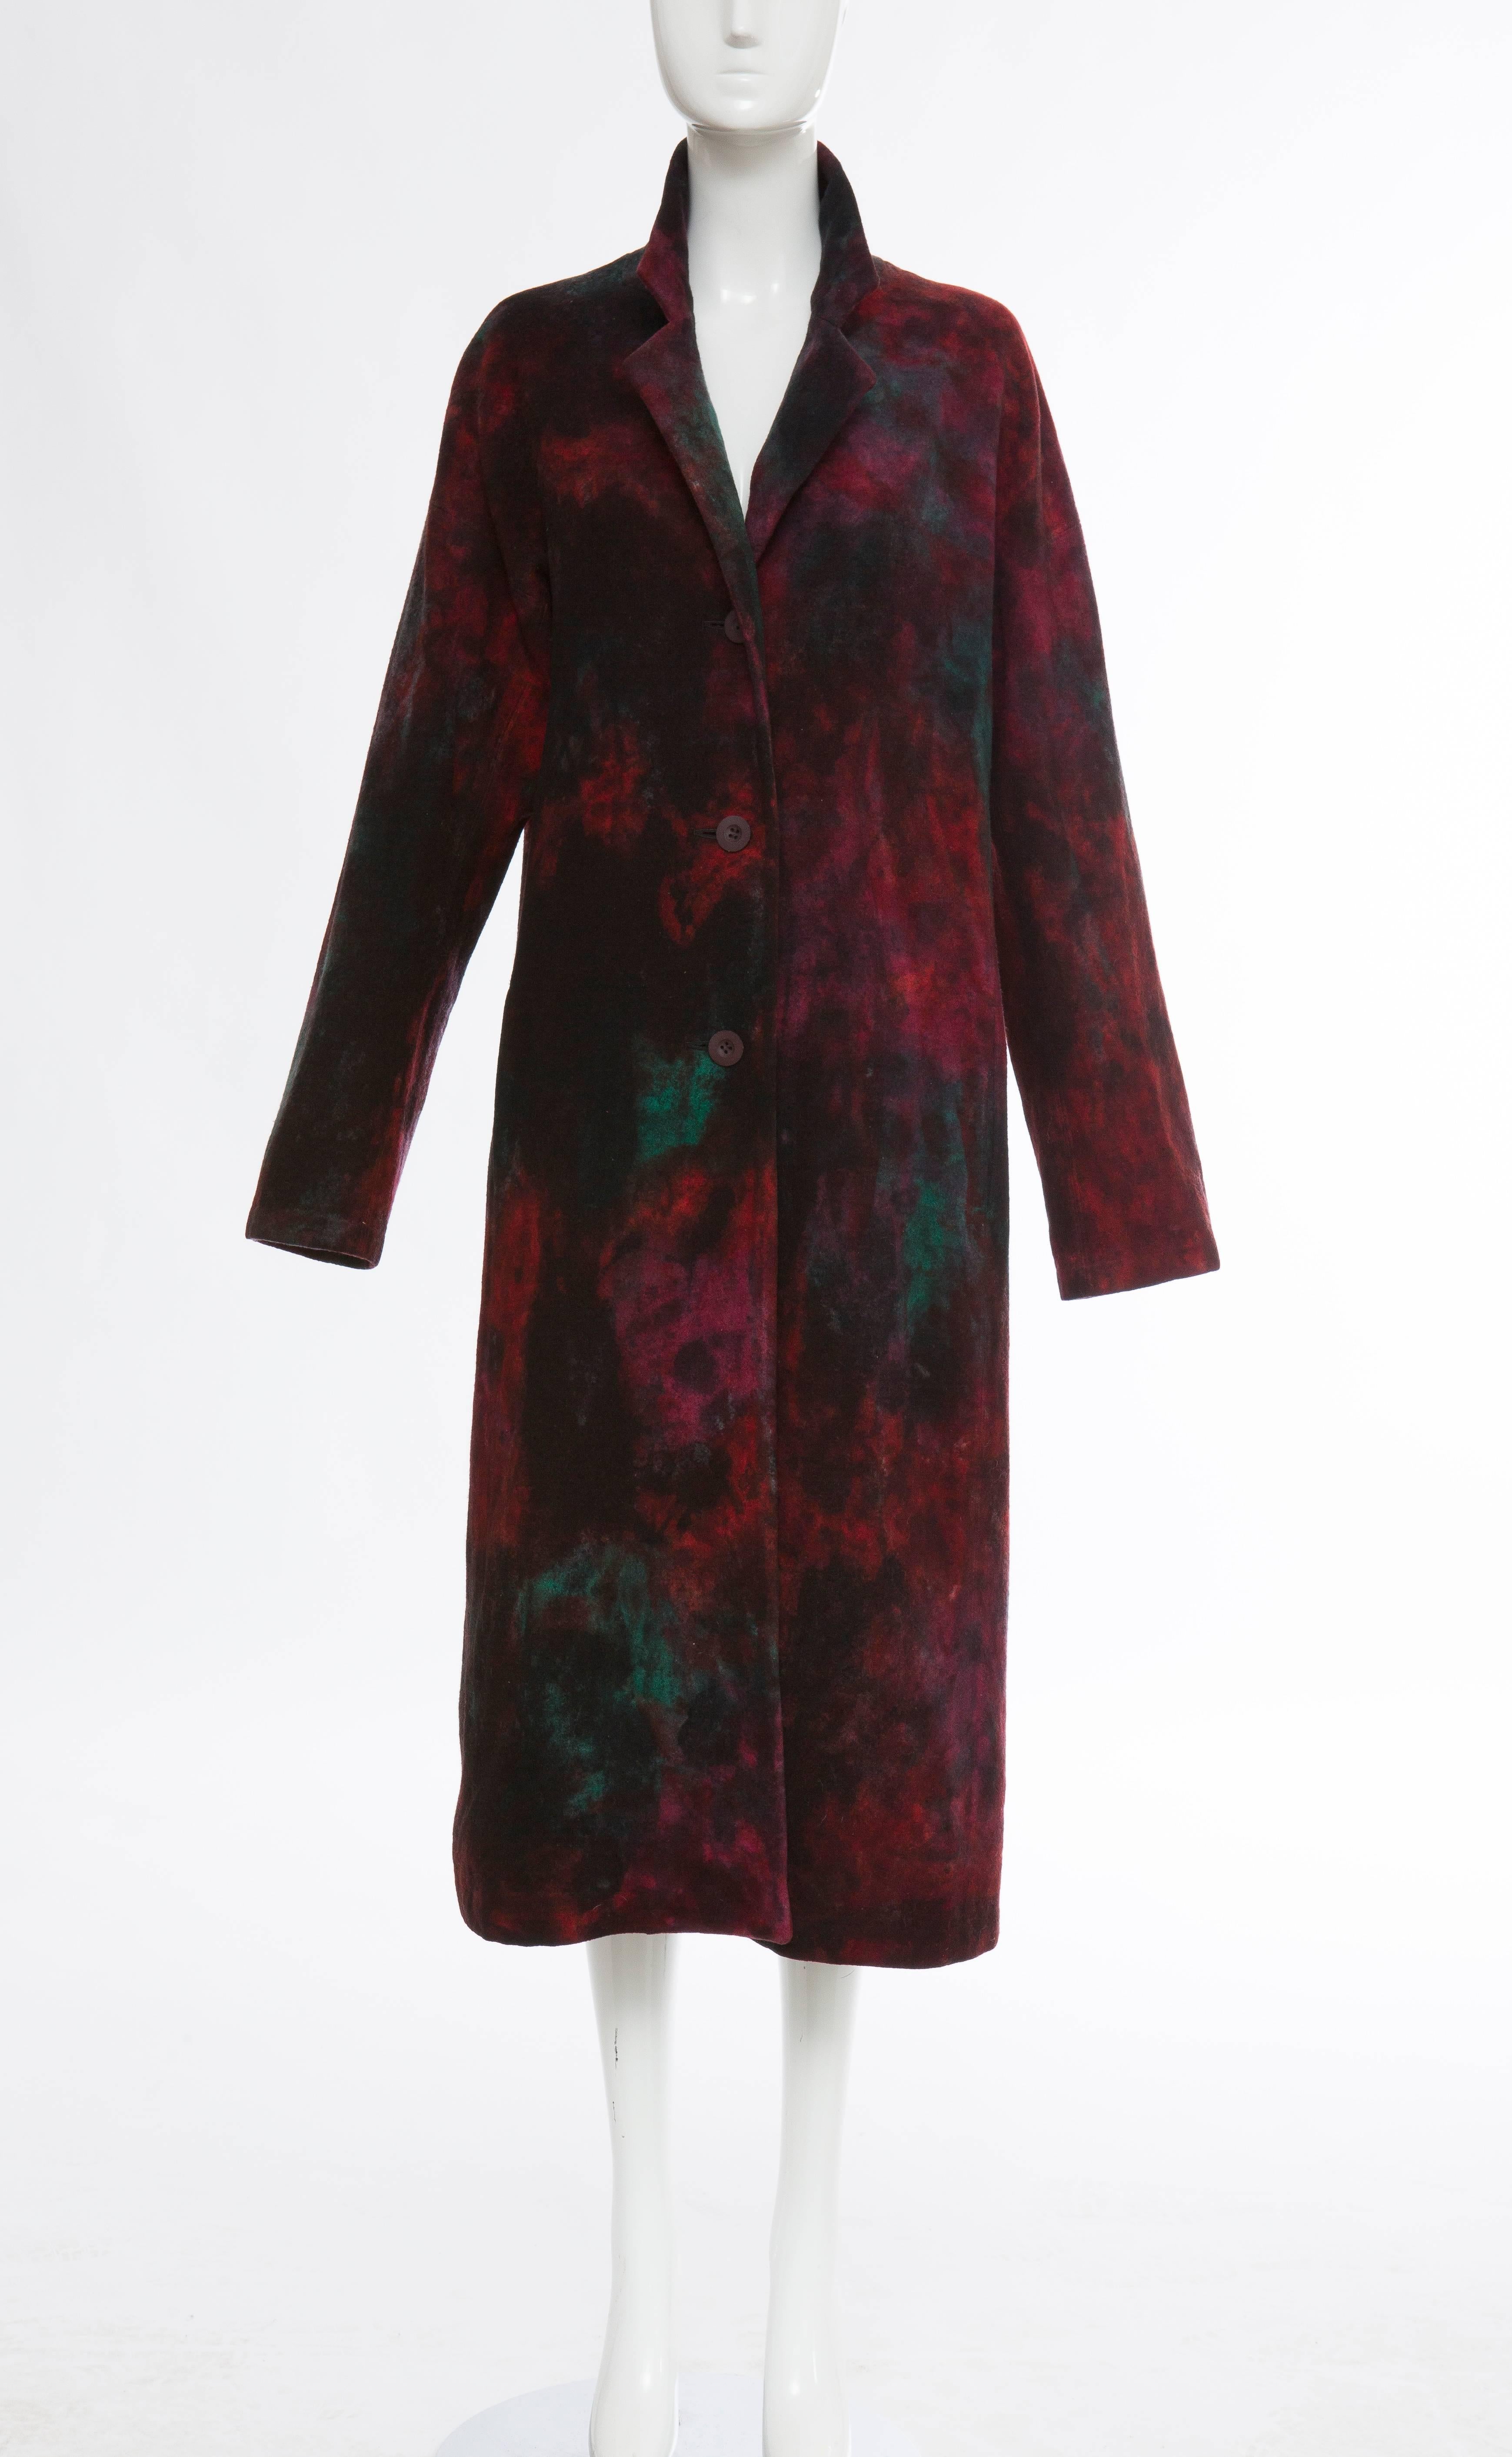 Issey Miyake, circa 1990's, tie die wool felt button front coat with notch collar, two inset front pockets and fully lined in silk.

Bust 40, Waist 41, Hips 46, Length 49